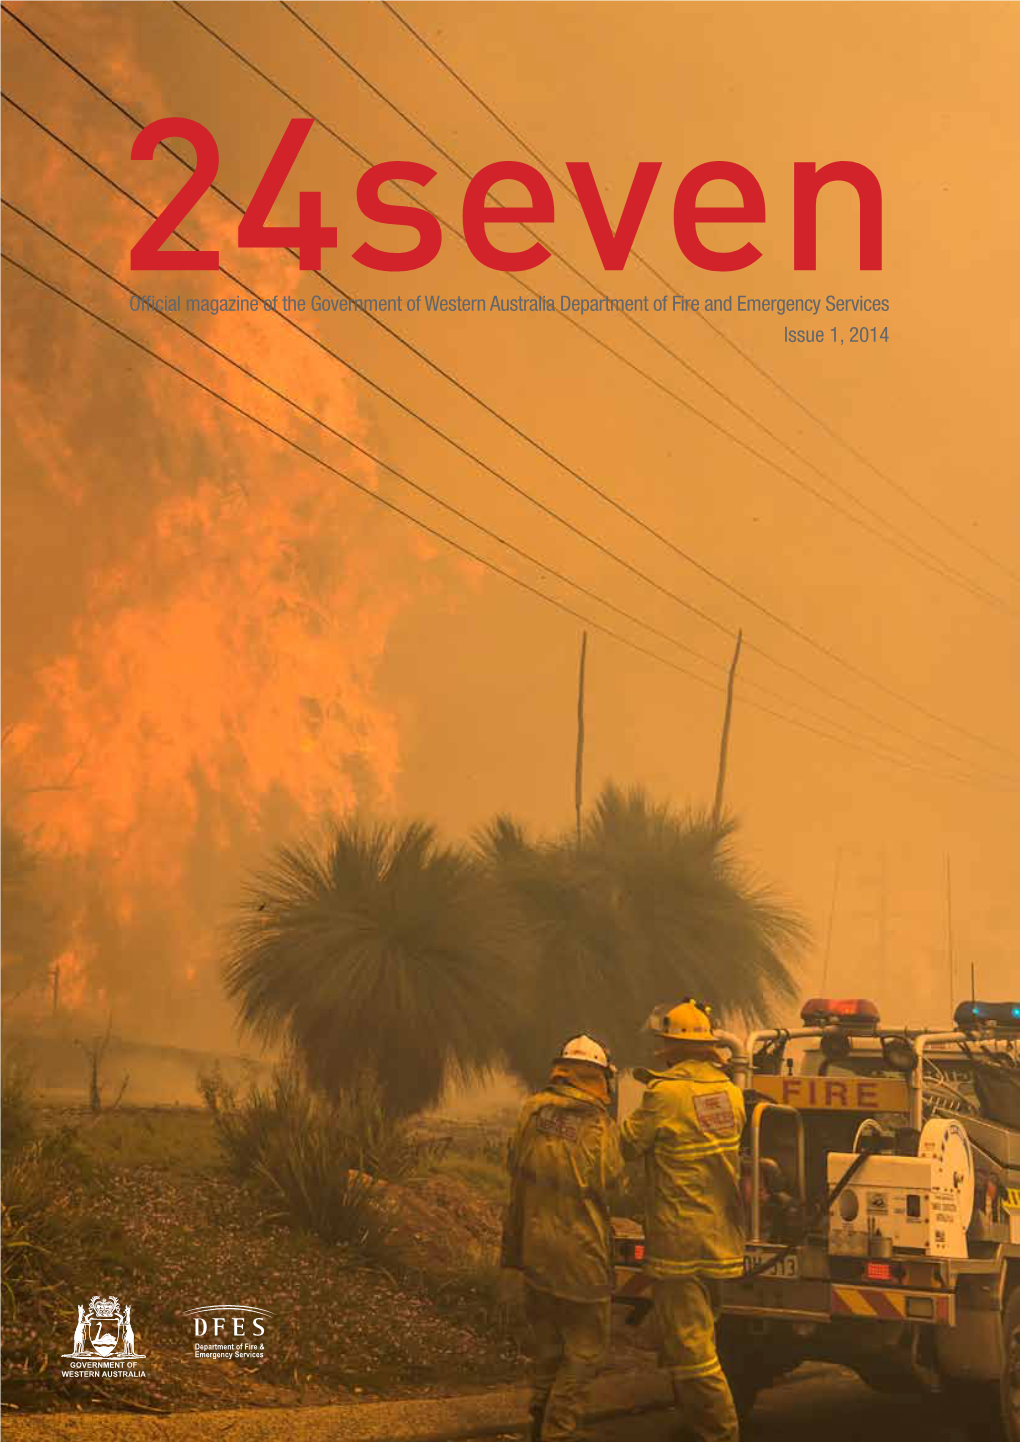 Official Magazine of the Government of Western Australia Department of Fire and Emergency Services Issue 1, 2014 from the Fire and Emergency Services Commissioner